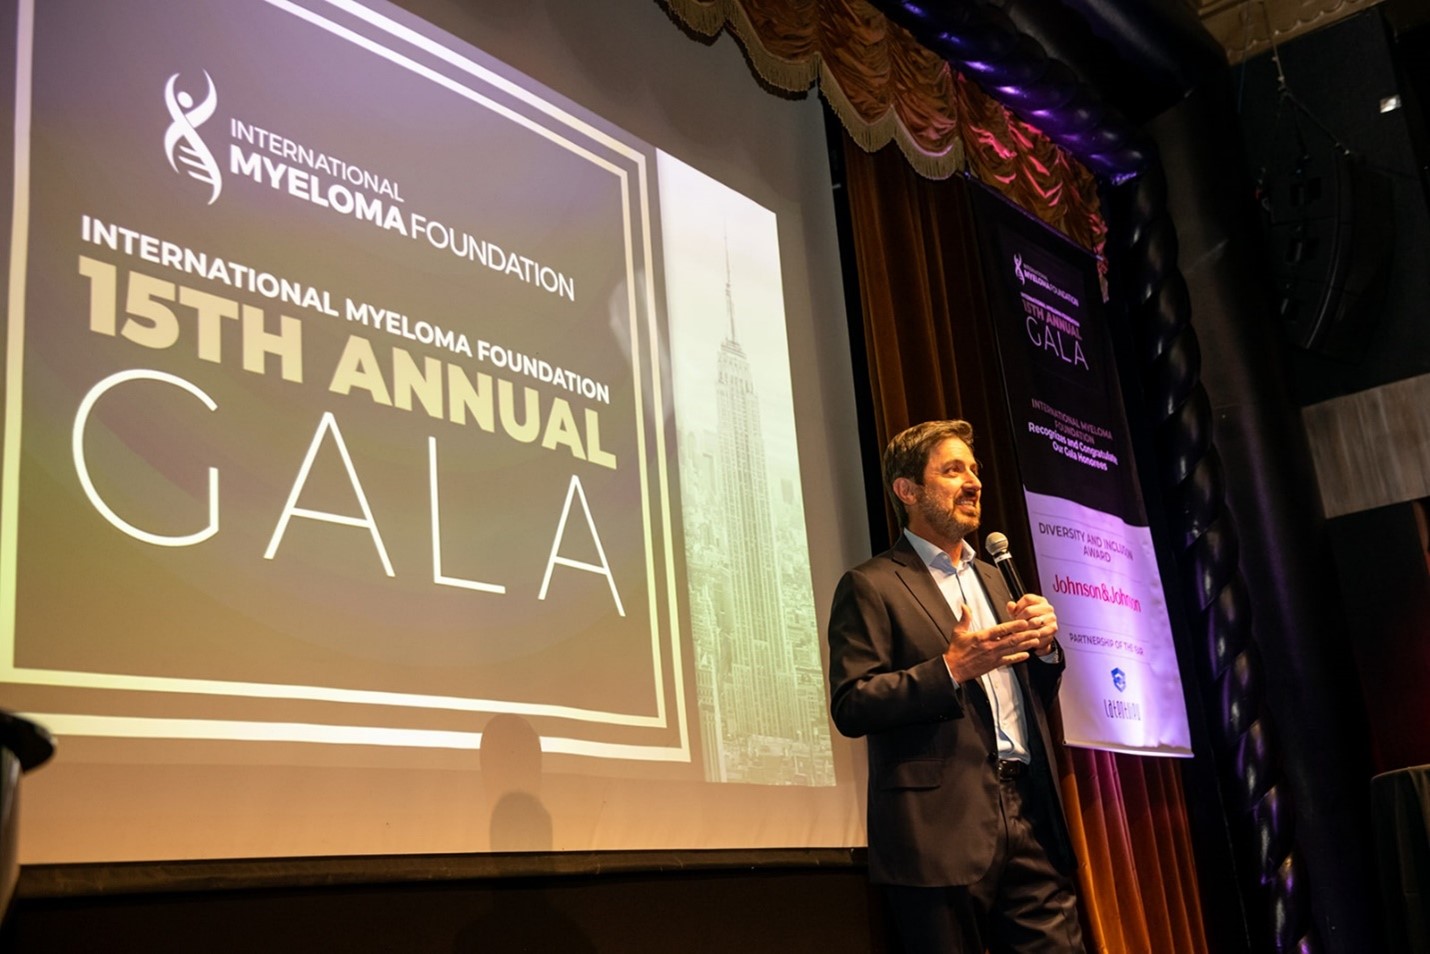 International Myeloma Foundation 15th Annual Gala: On Thursday, April 18, The International Myeloma Foundation (IMF) held its 15th Annual Gala for the first time at the Edison Ballroom in New York City hosted by renowned actor and comedian Ray Romano.